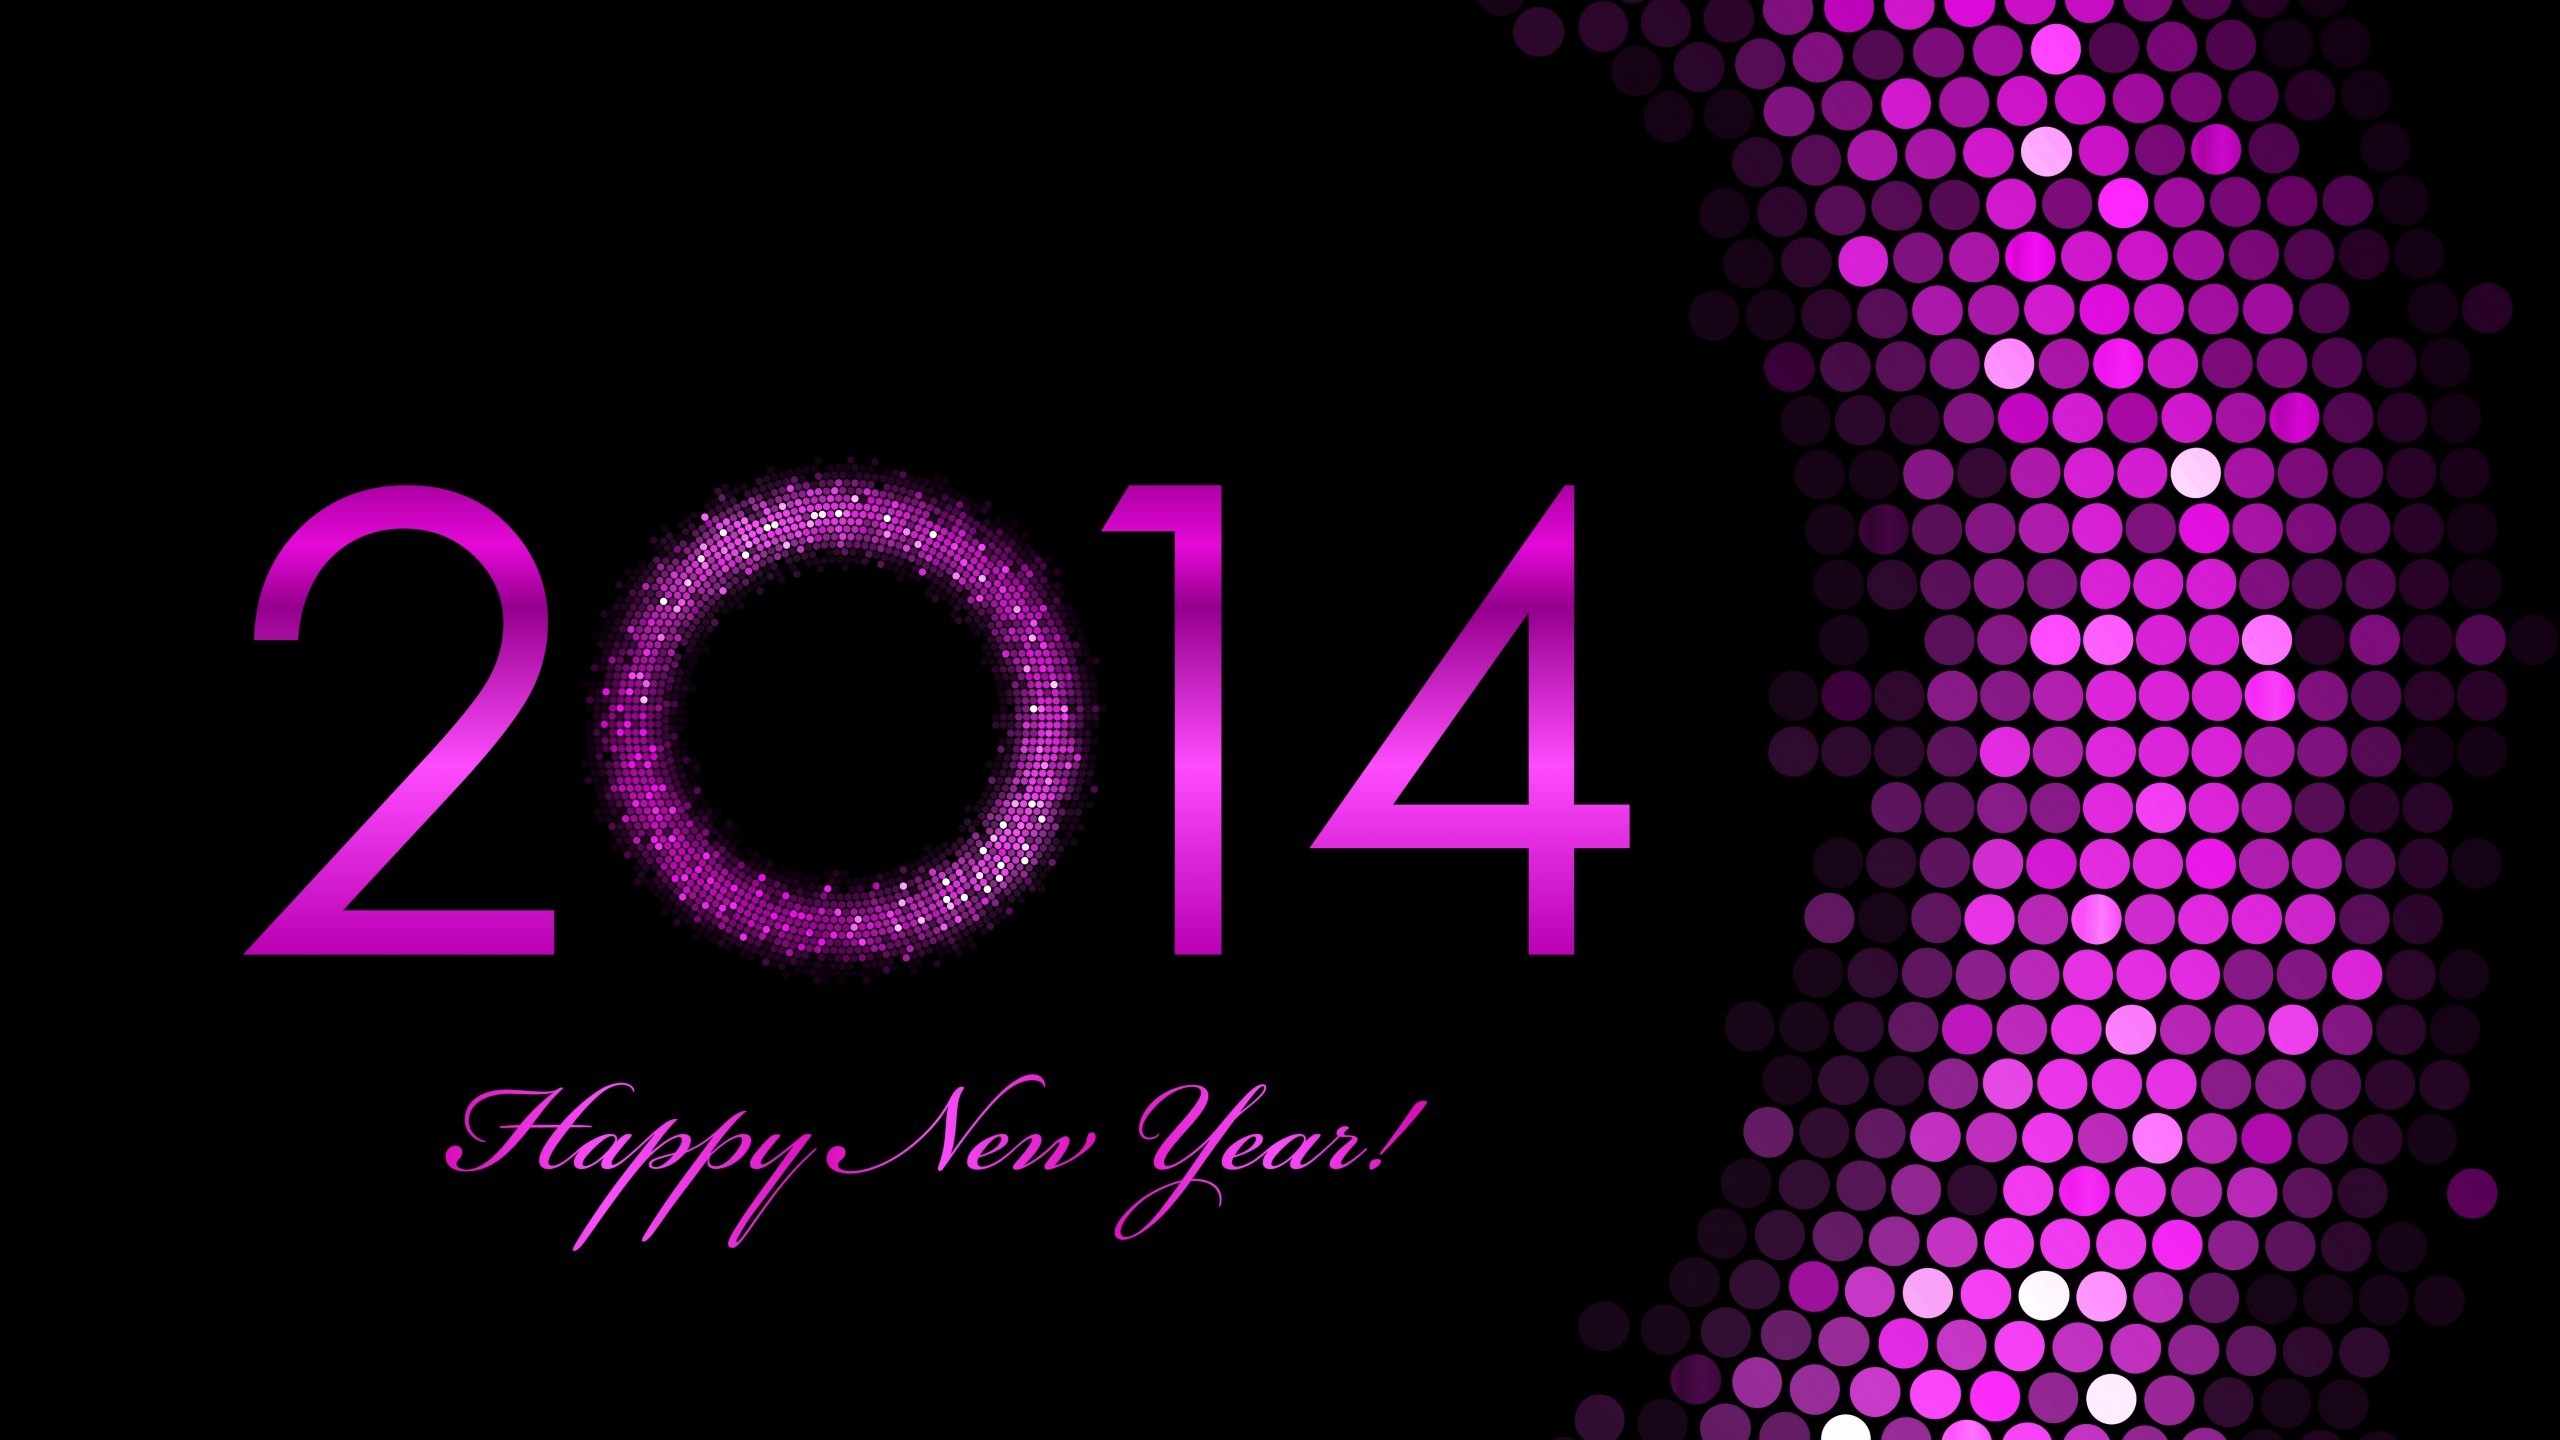 2014 Happy New Year for 2560x1440 HDTV resolution